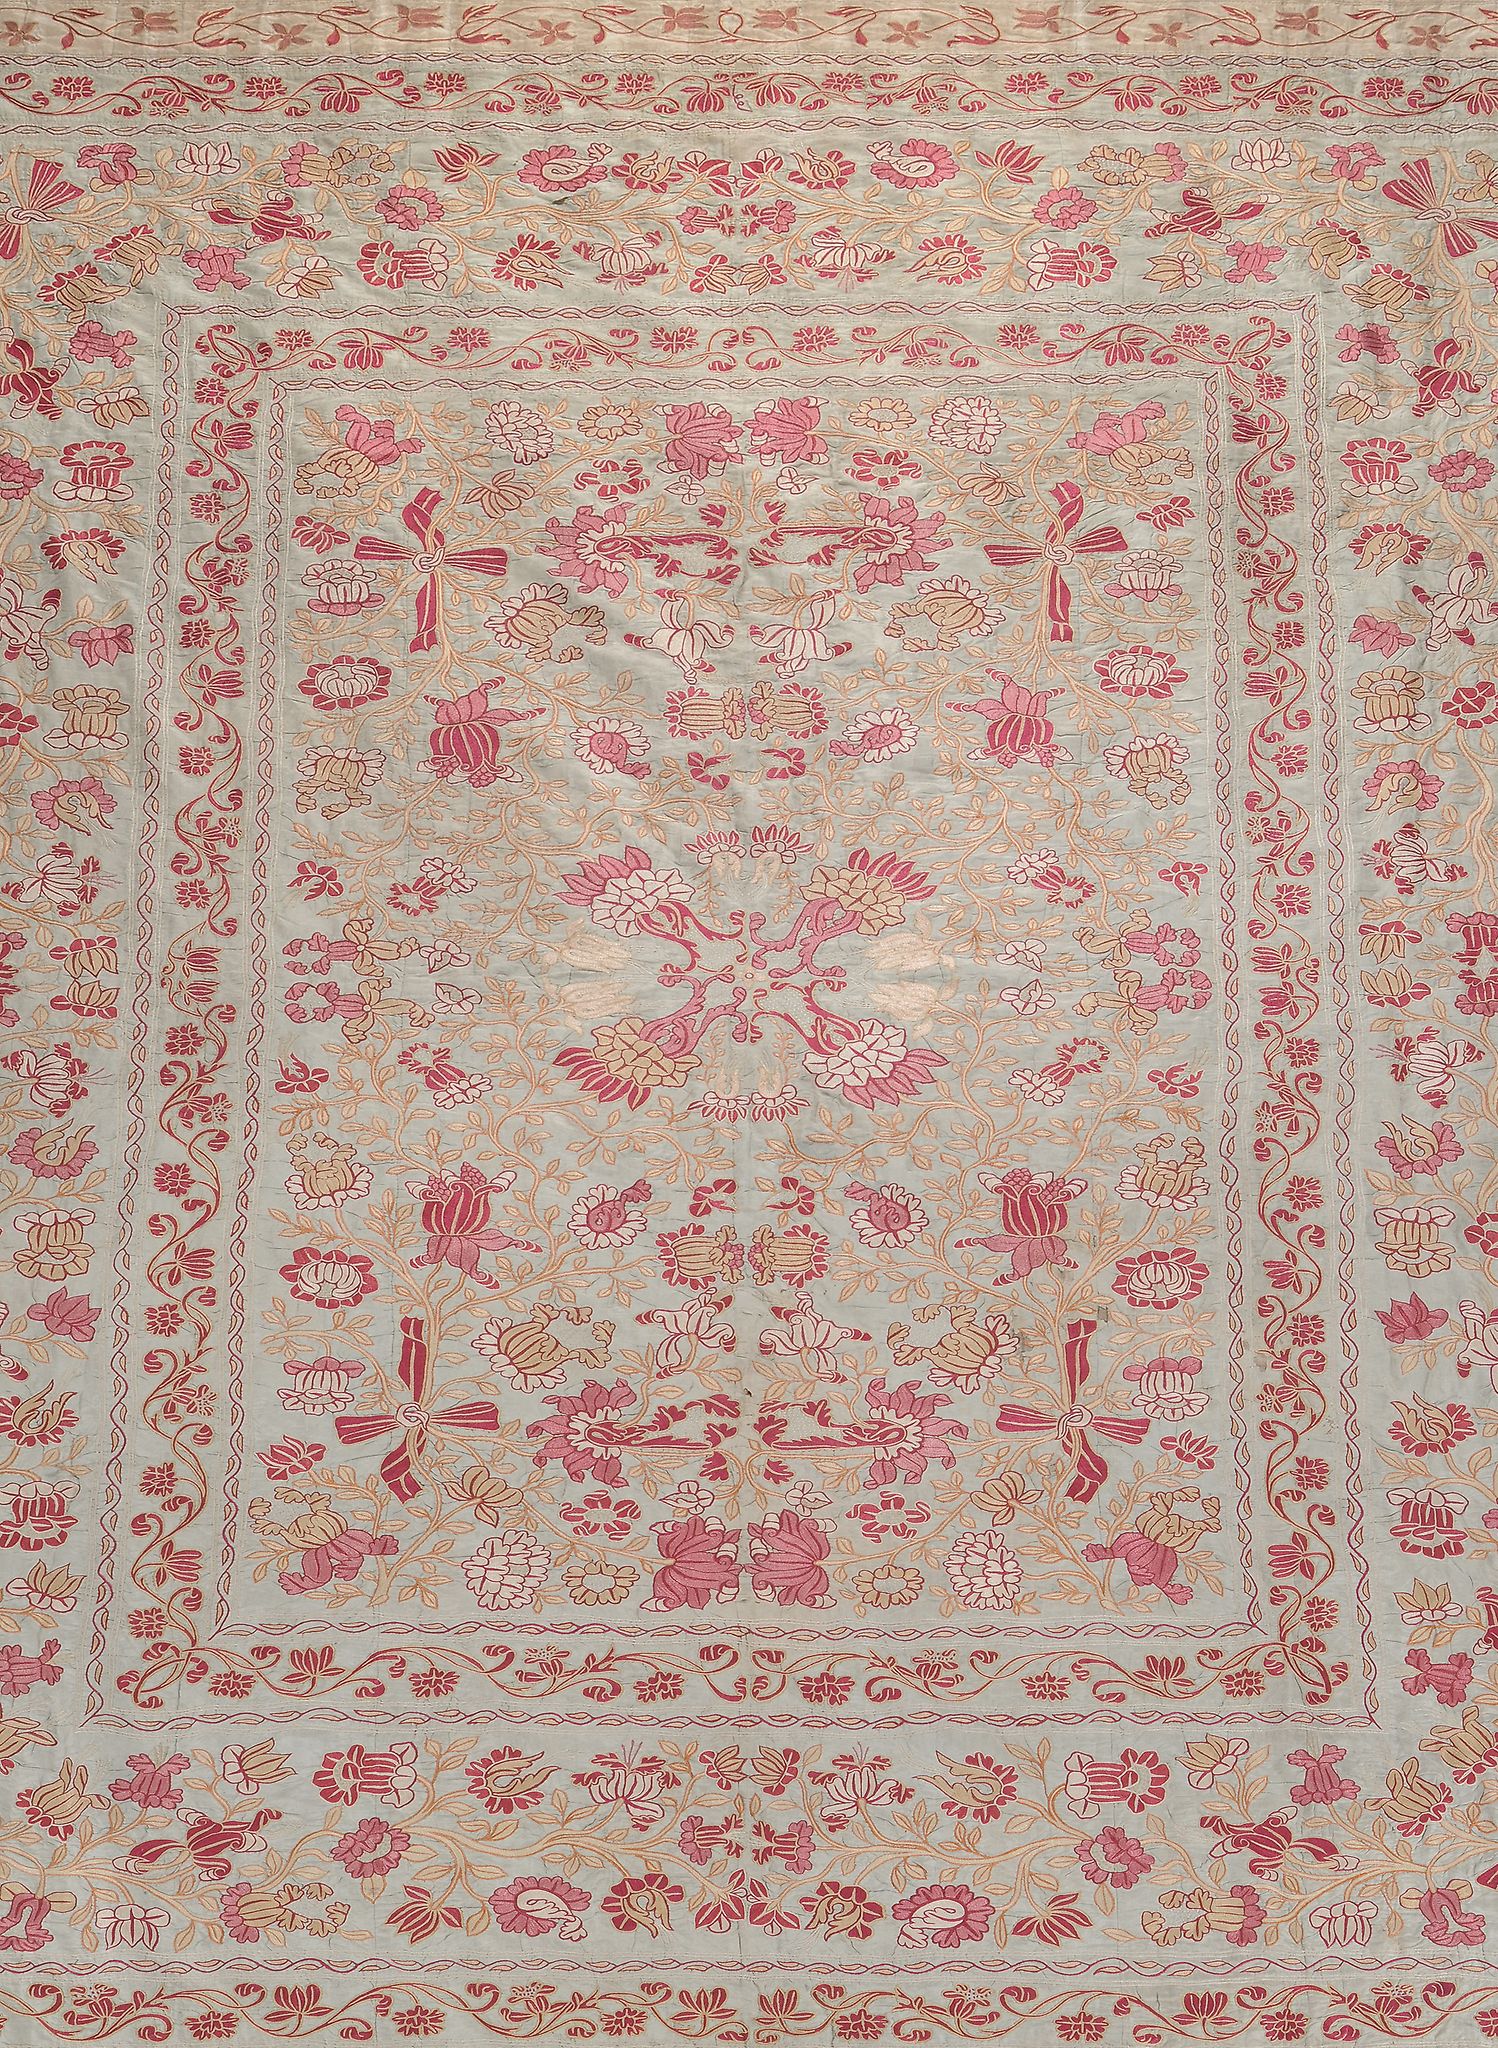 An Indo-Portuguese coverlet, second half 18th century - Image 2 of 3